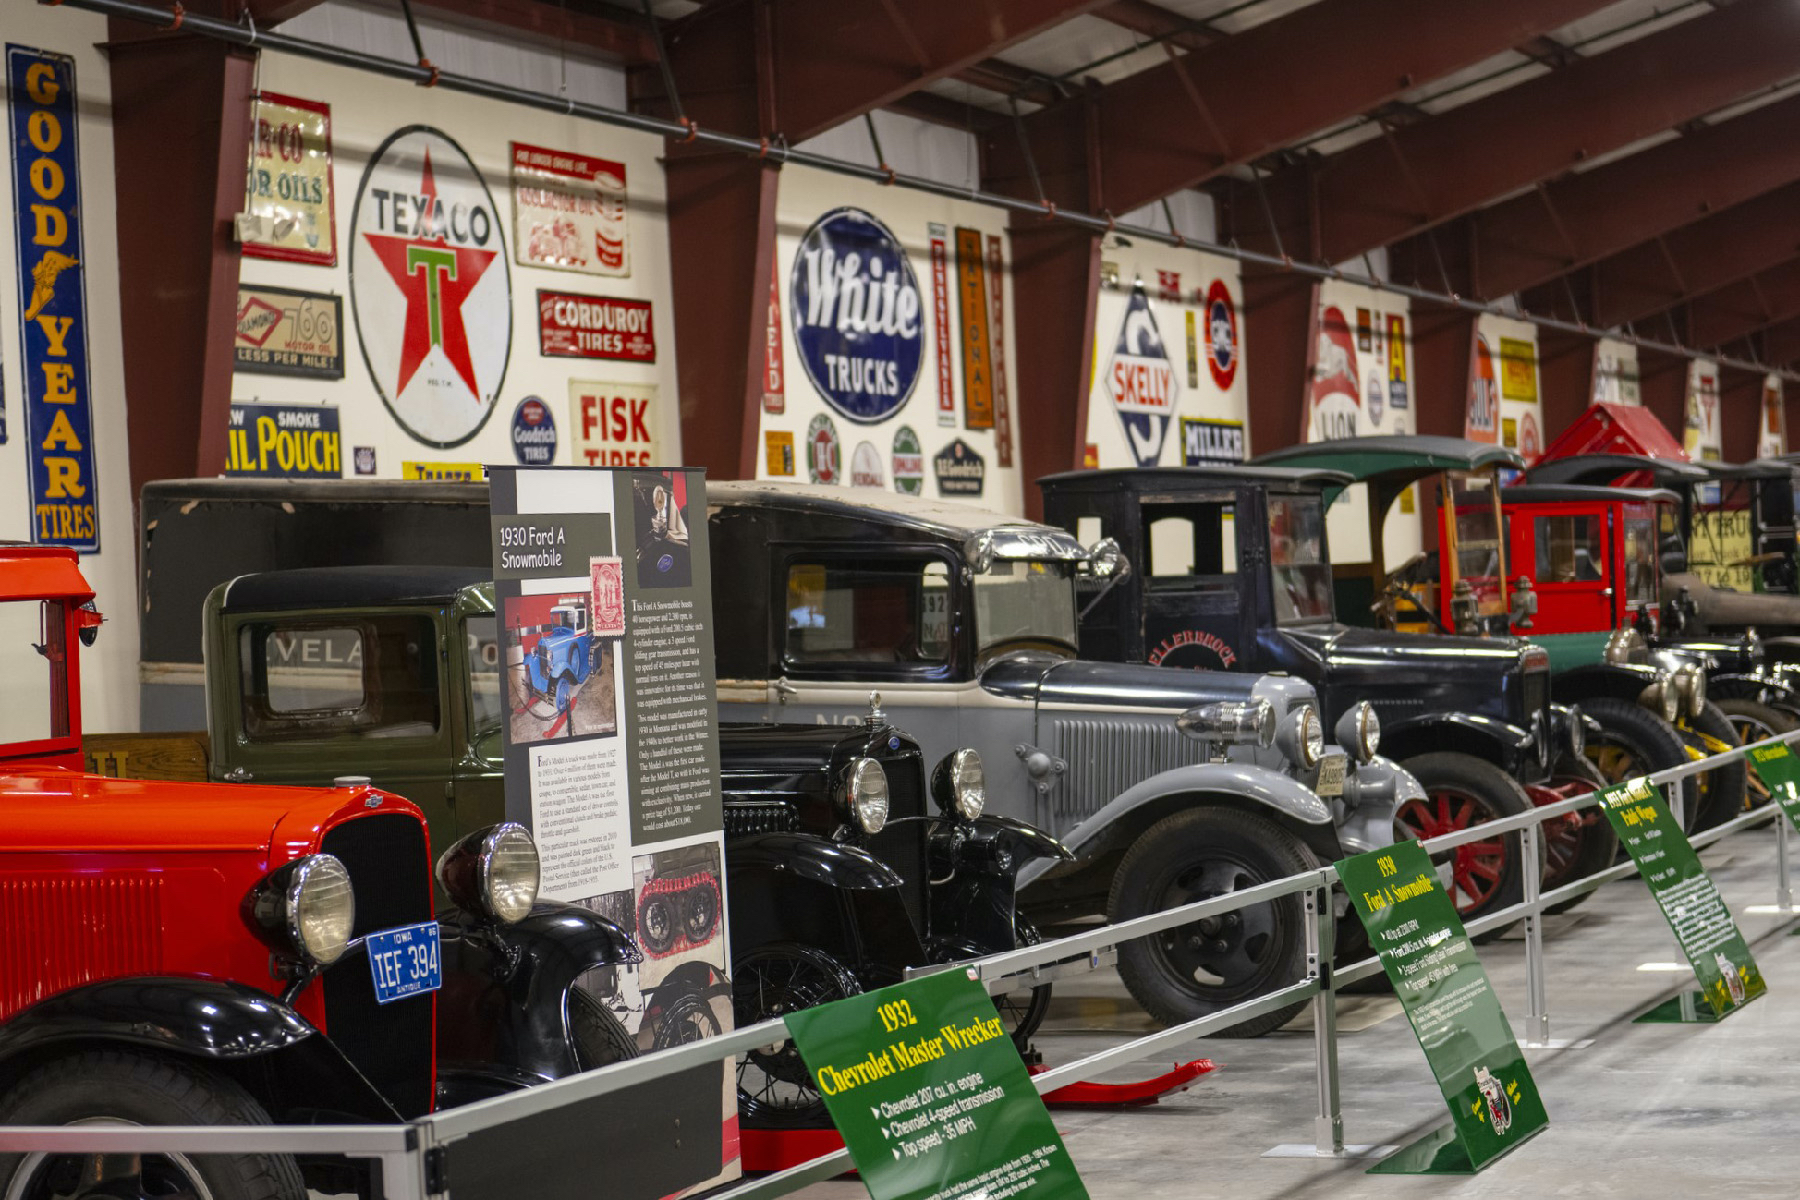 The Iowa 80 Trucking Museum is but one of the pastimes to explore at the Iowa 80 truck stop in Walcott, Iowa.